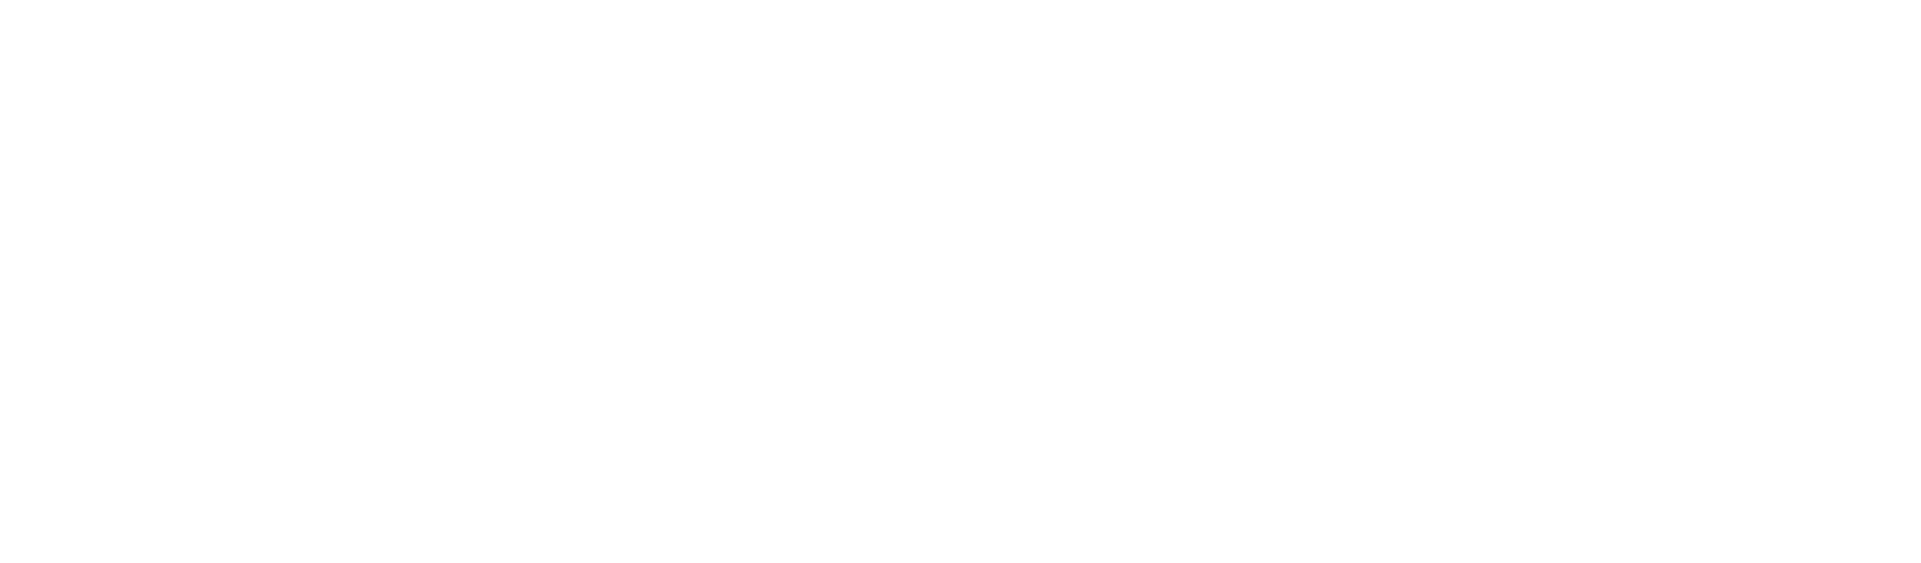 Silverstone Official Hospitality